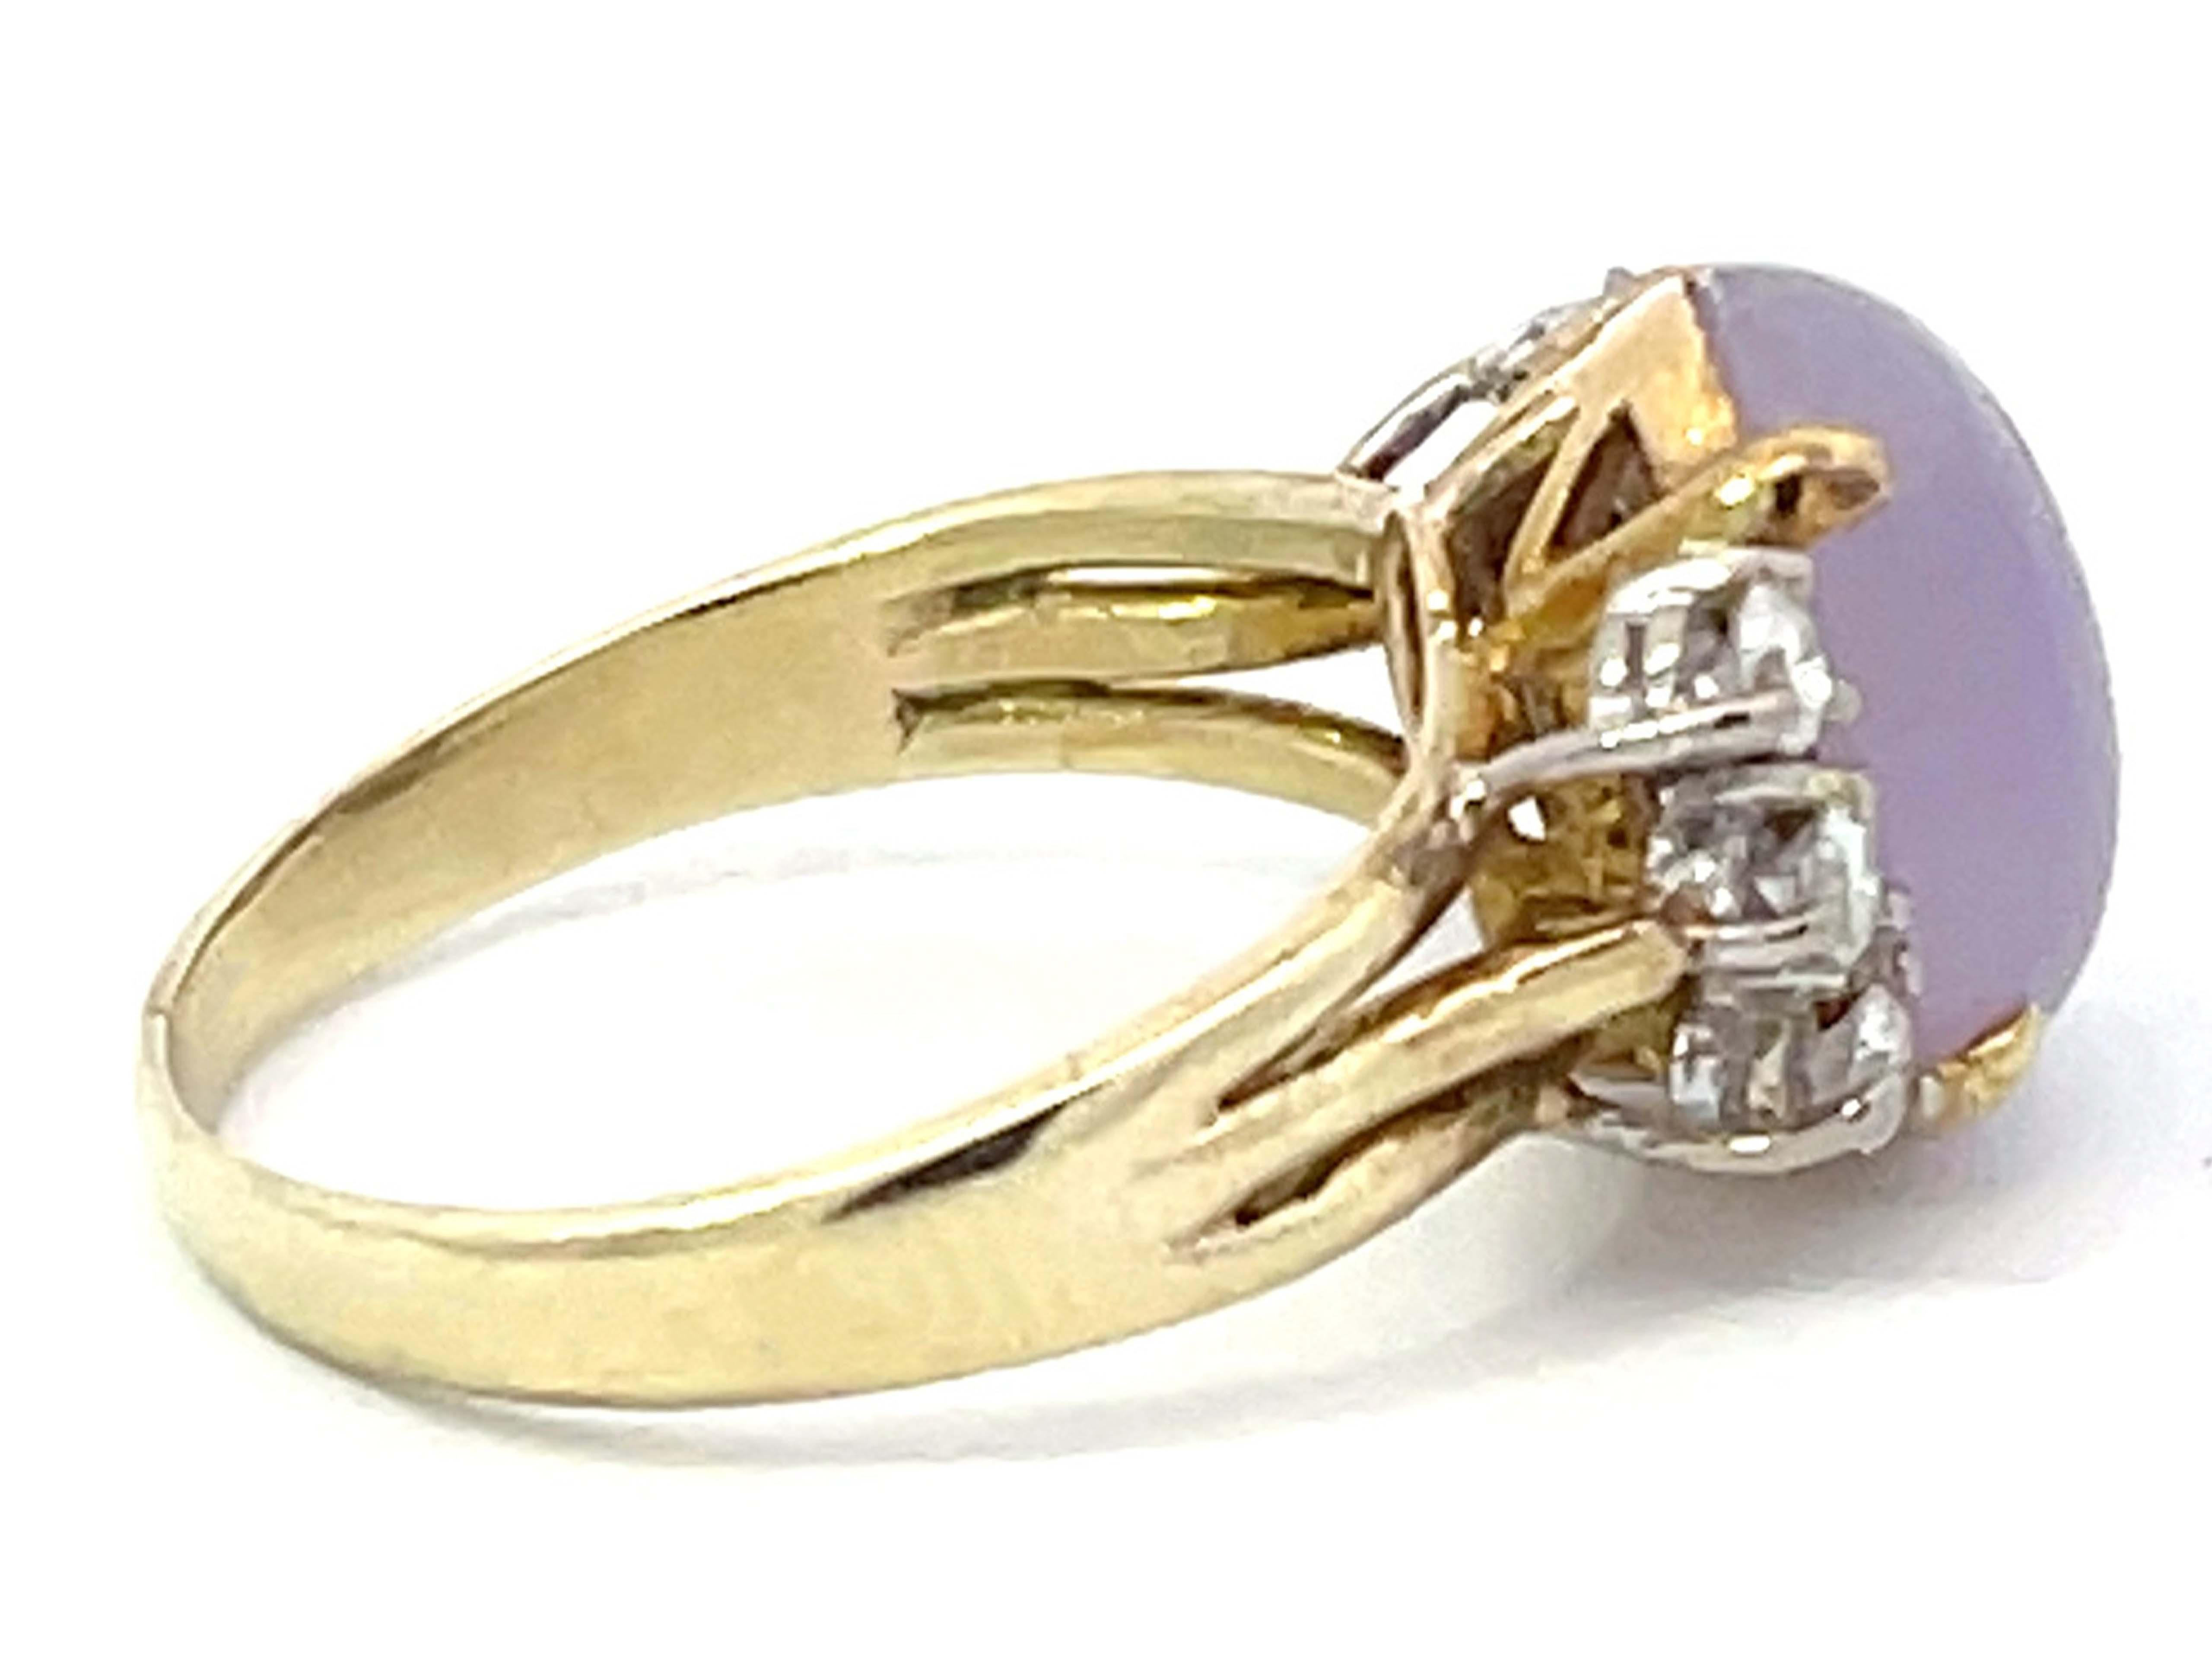 Lavender Jade and Diamond Ring in 14k Yellow Gold In Excellent Condition For Sale In Honolulu, HI